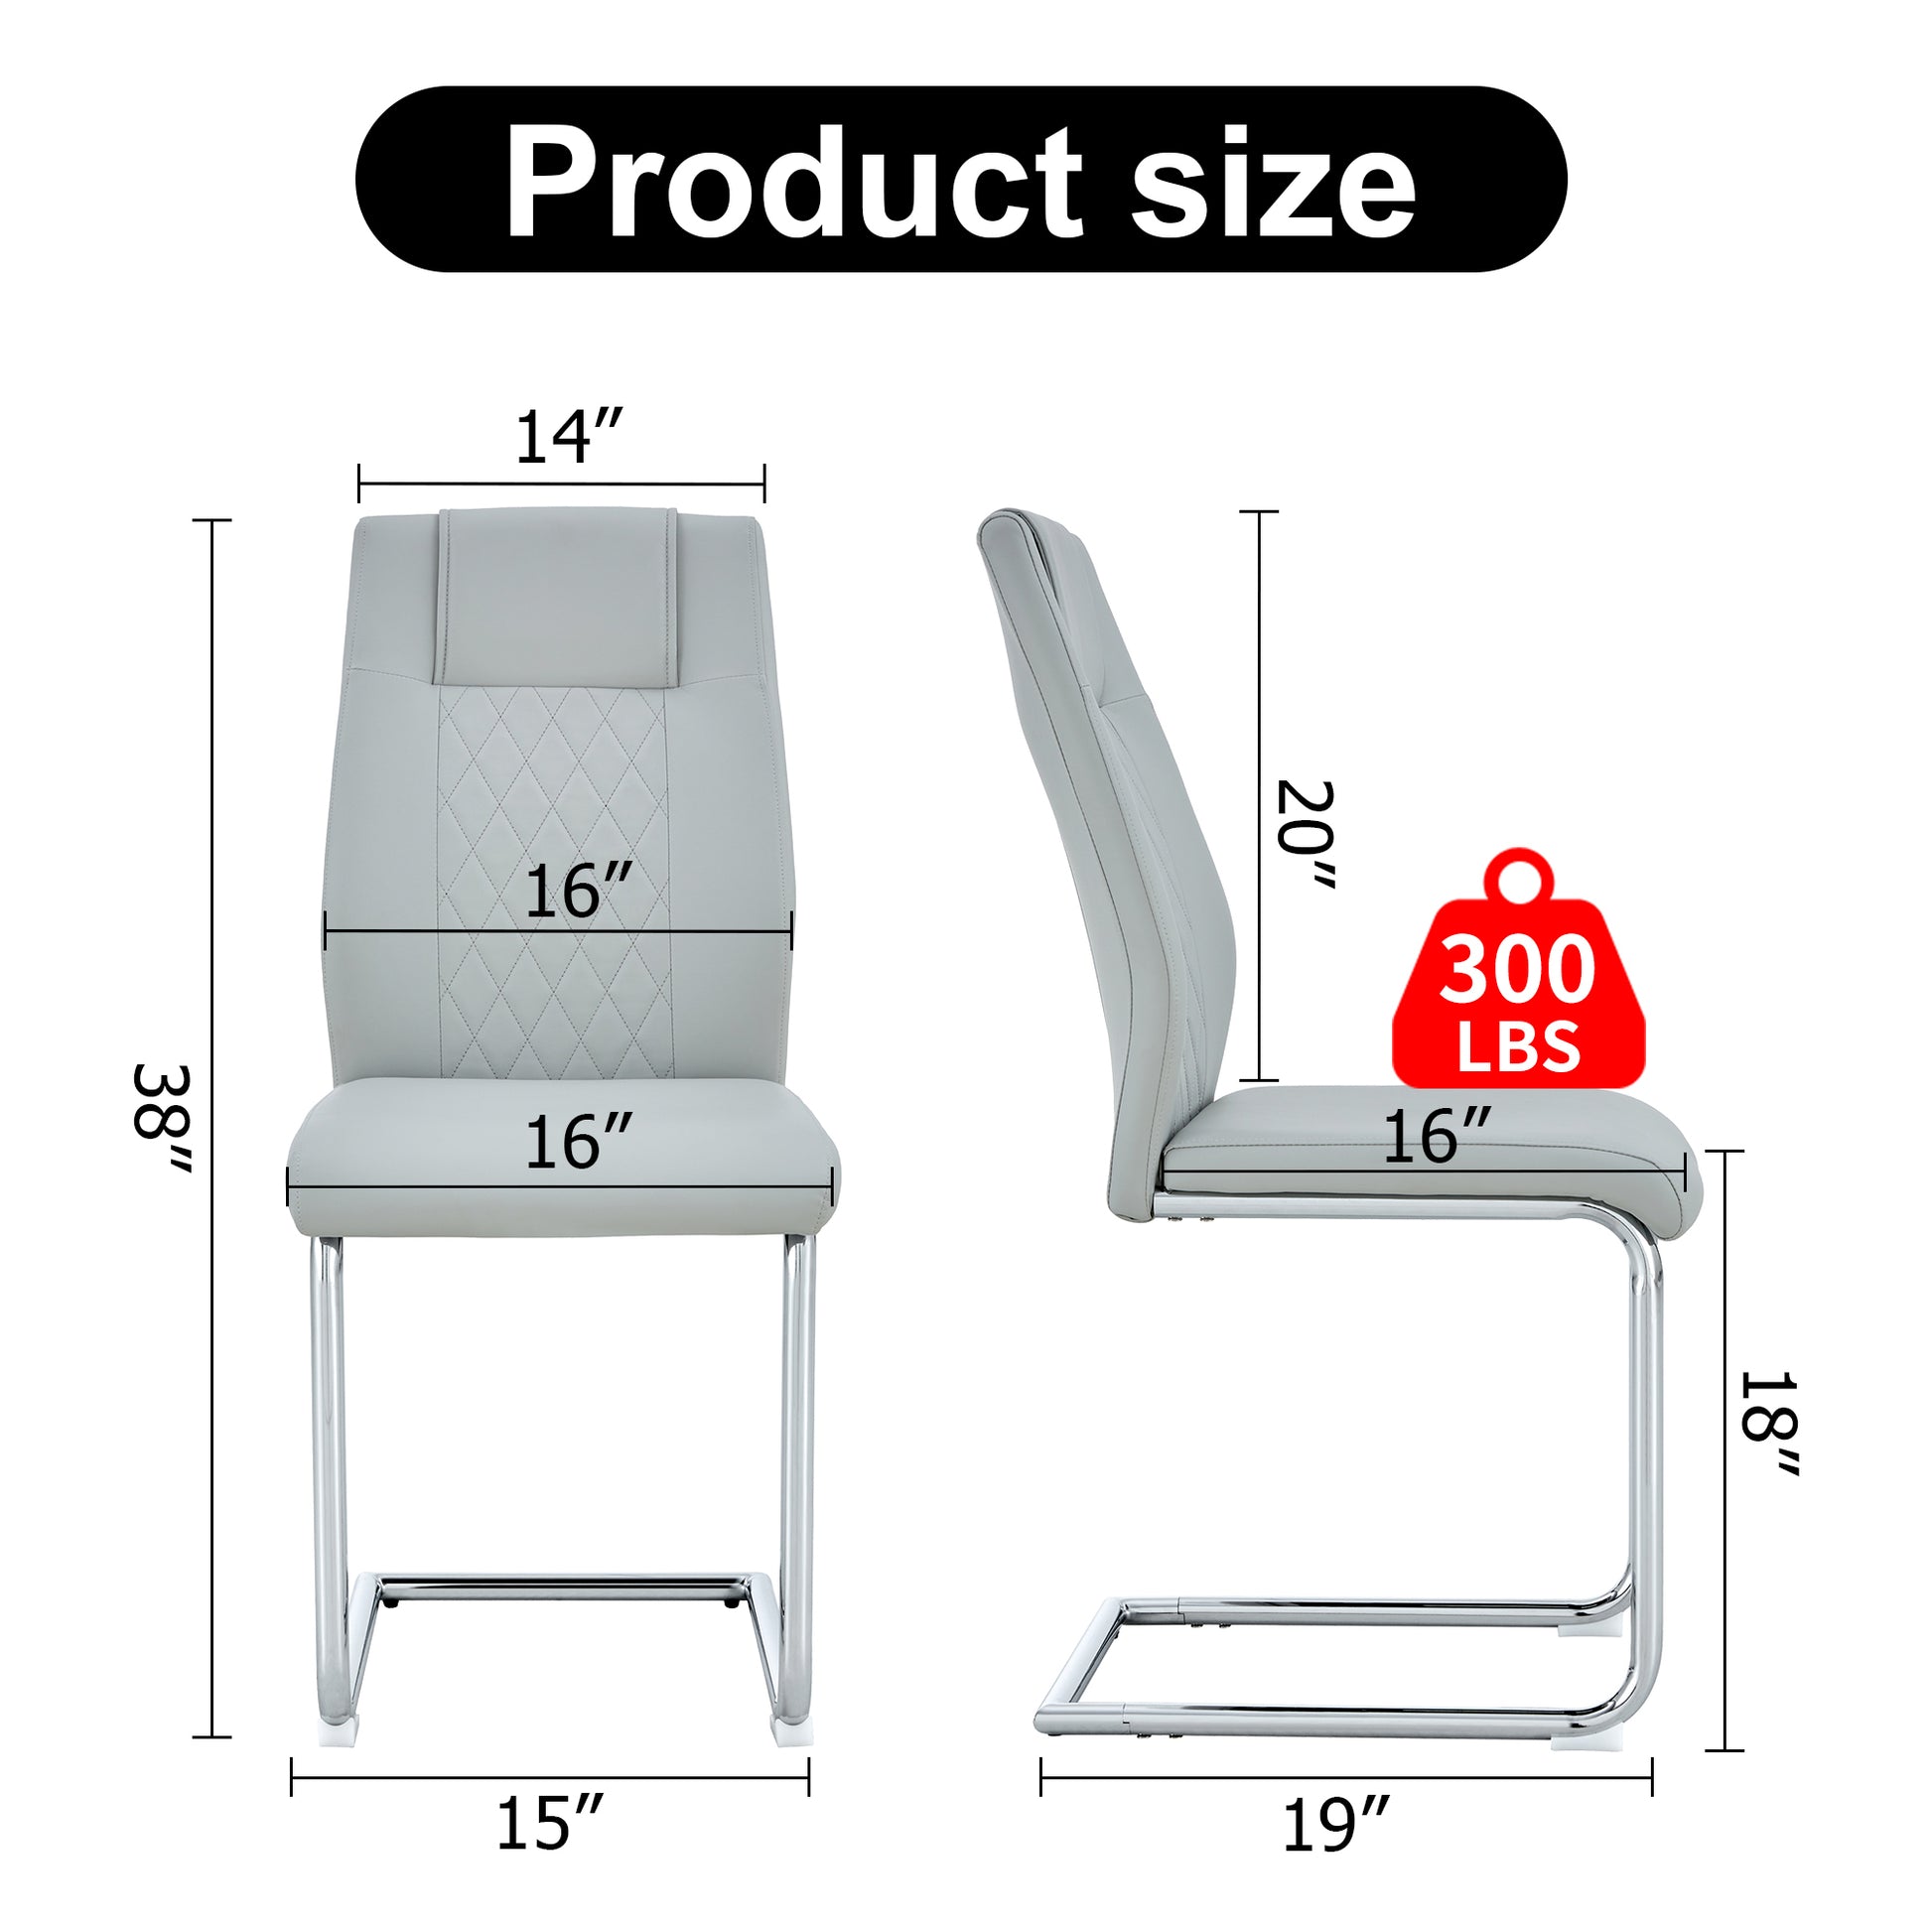 Living room chairs with metal legs - Ukerr Home